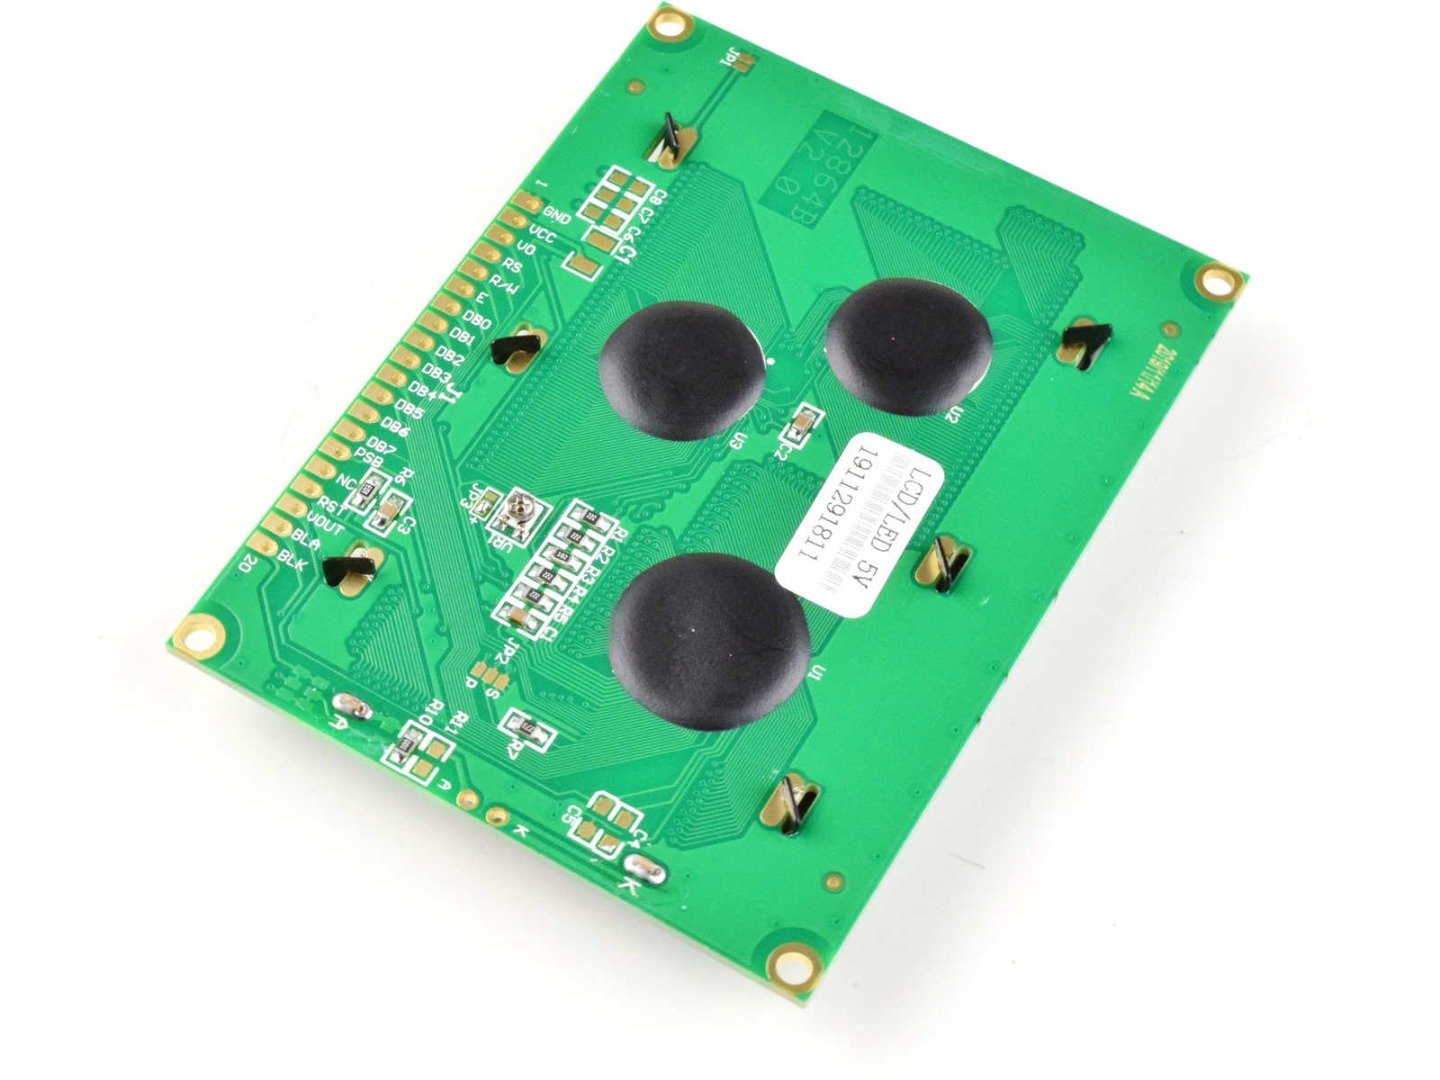 LCD12864 128×64 Graphic Display SPI, green-yellow, ST7920 8